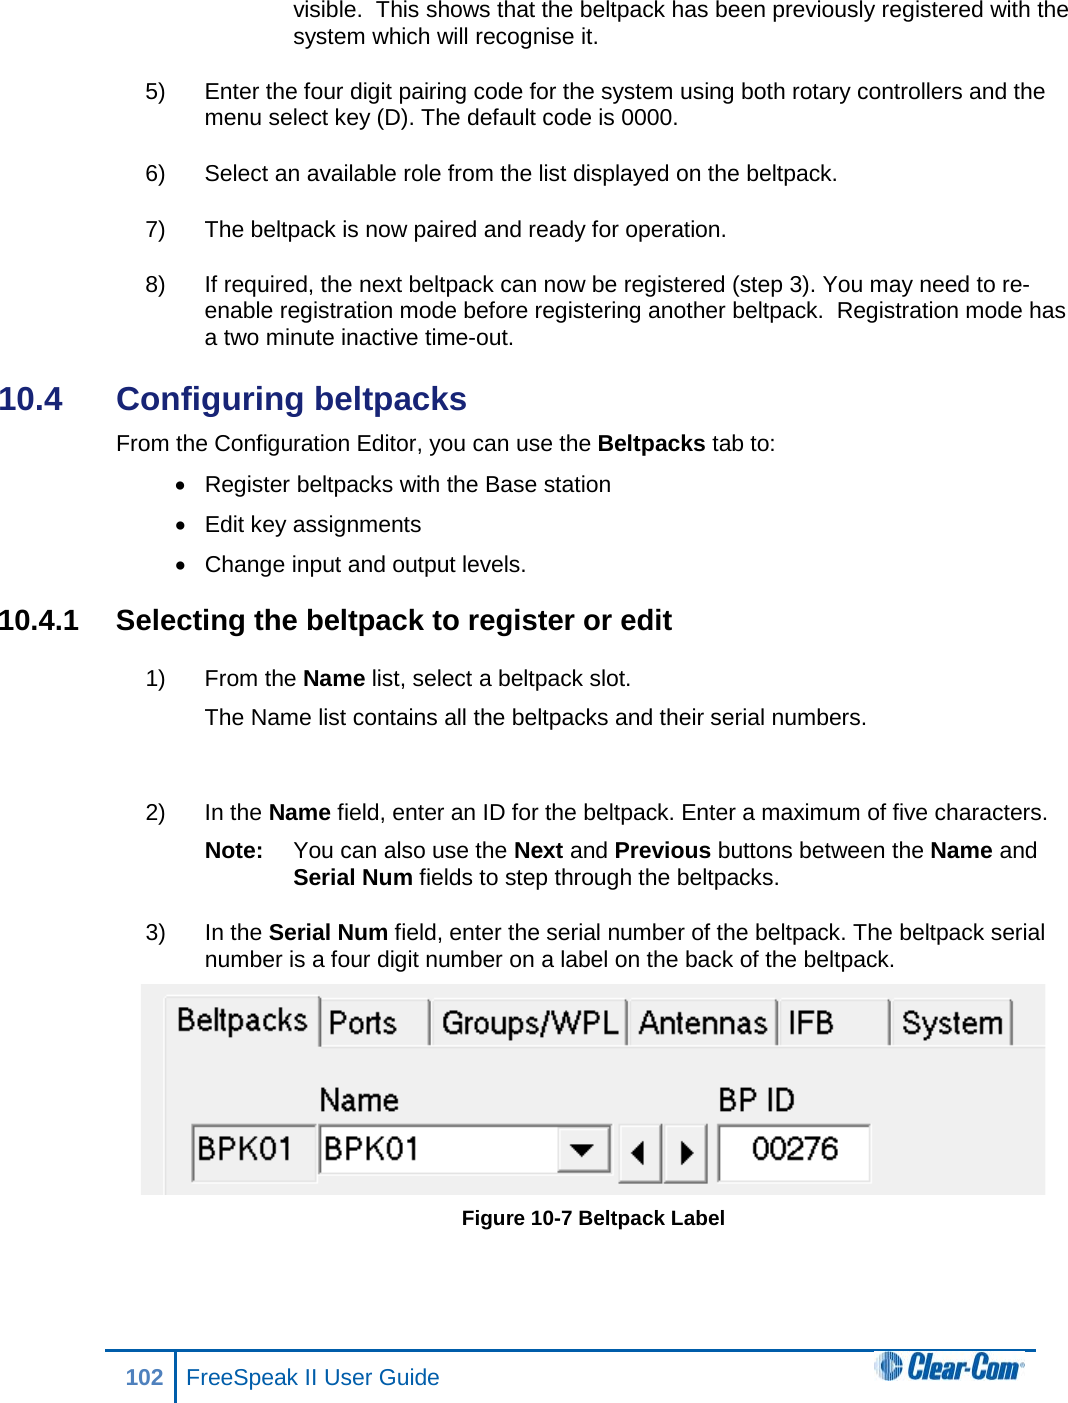 visible.  This shows that the beltpack has been previously registered with the system which will recognise it.  5) Enter the four digit pairing code for the system using both rotary controllers and the menu select key (D). The default code is 0000.  6) Select an available role from the list displayed on the beltpack. 7) The beltpack is now paired and ready for operation.   8) If required, the next beltpack can now be registered (step 3). You may need to re-enable registration mode before registering another beltpack.  Registration mode has a two minute inactive time-out.  10.4  Configuring beltpacks From the Configuration Editor, you can use the Beltpacks tab to: • Register beltpacks with the Base station • Edit key assignments  • Change input and output levels. 10.4.1  Selecting the beltpack to register or edit 1) From the Name list, select a beltpack slot.  The Name list contains all the beltpacks and their serial numbers.   2) In the Name field, enter an ID for the beltpack. Enter a maximum of five characters. Note: You can also use the Next and Previous buttons between the Name and Serial Num fields to step through the beltpacks. 3) In the Serial Num field, enter the serial number of the beltpack. The beltpack serial number is a four digit number on a label on the back of the beltpack.  Figure 10-7 Beltpack Label 102 FreeSpeak II User Guide  